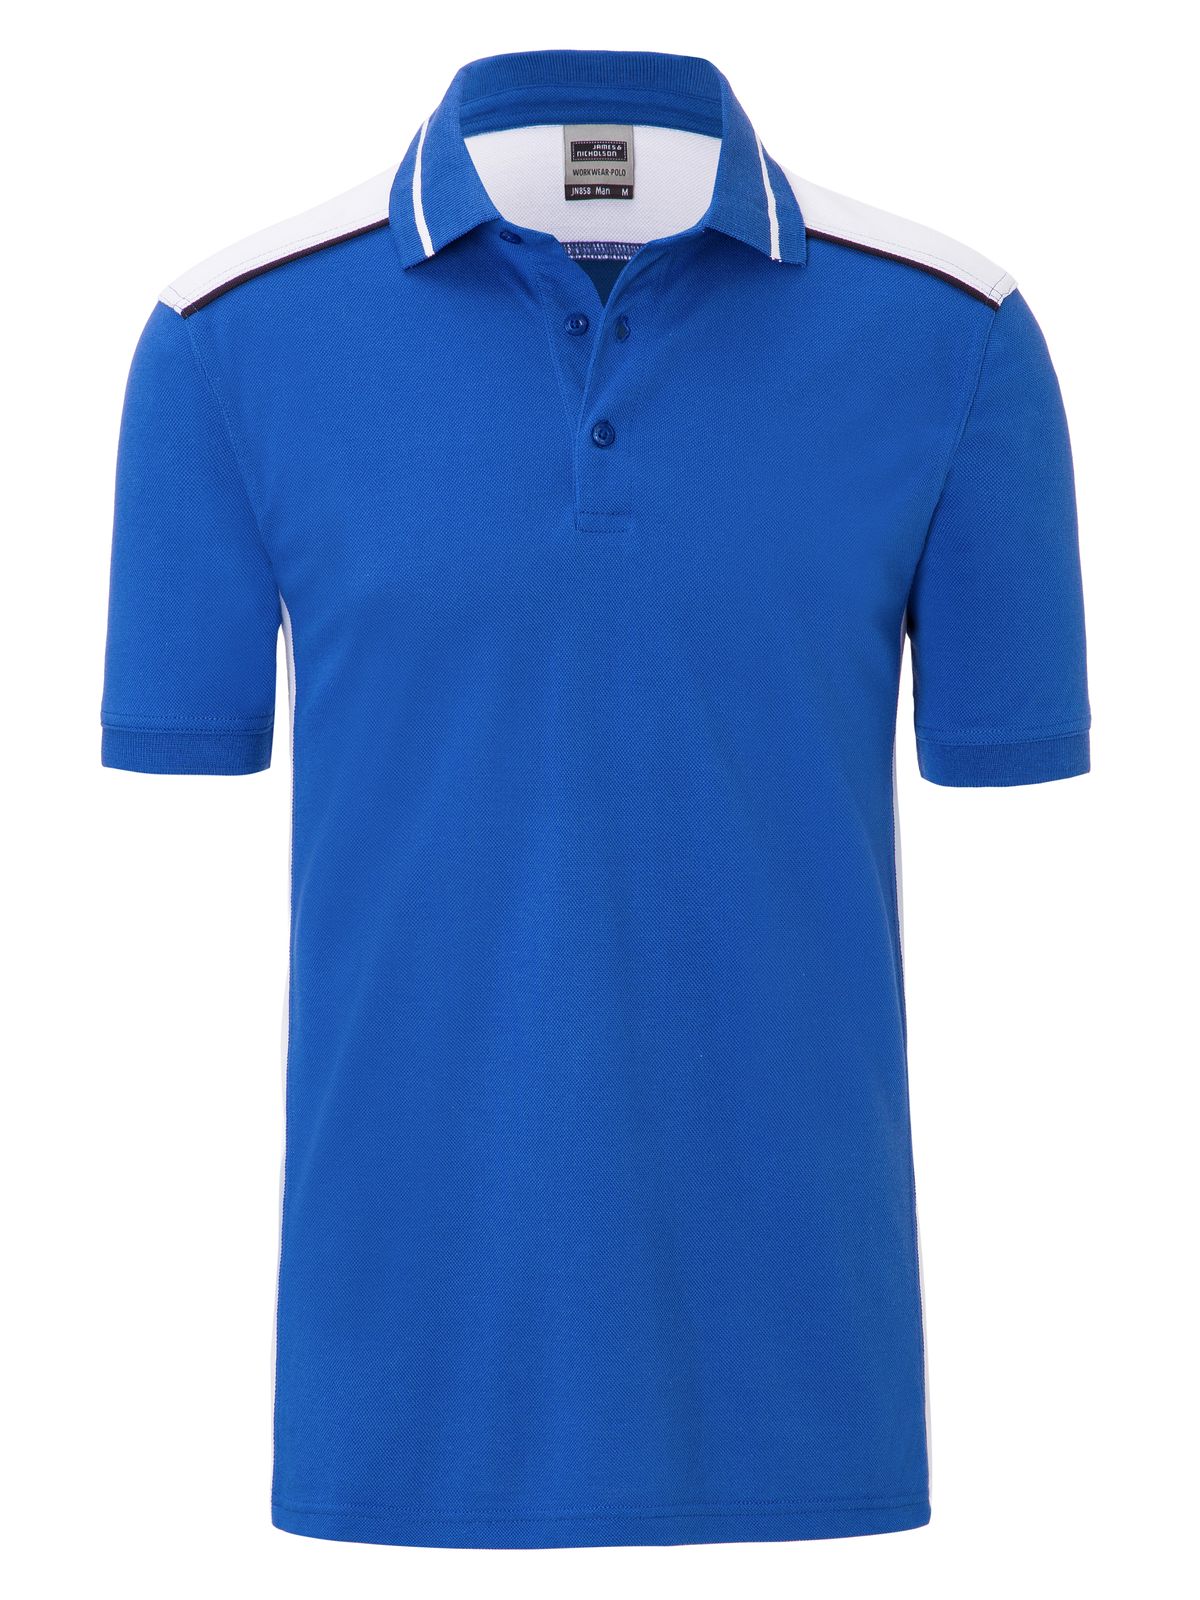 mens-workwear-polo-color-royal-white.webp